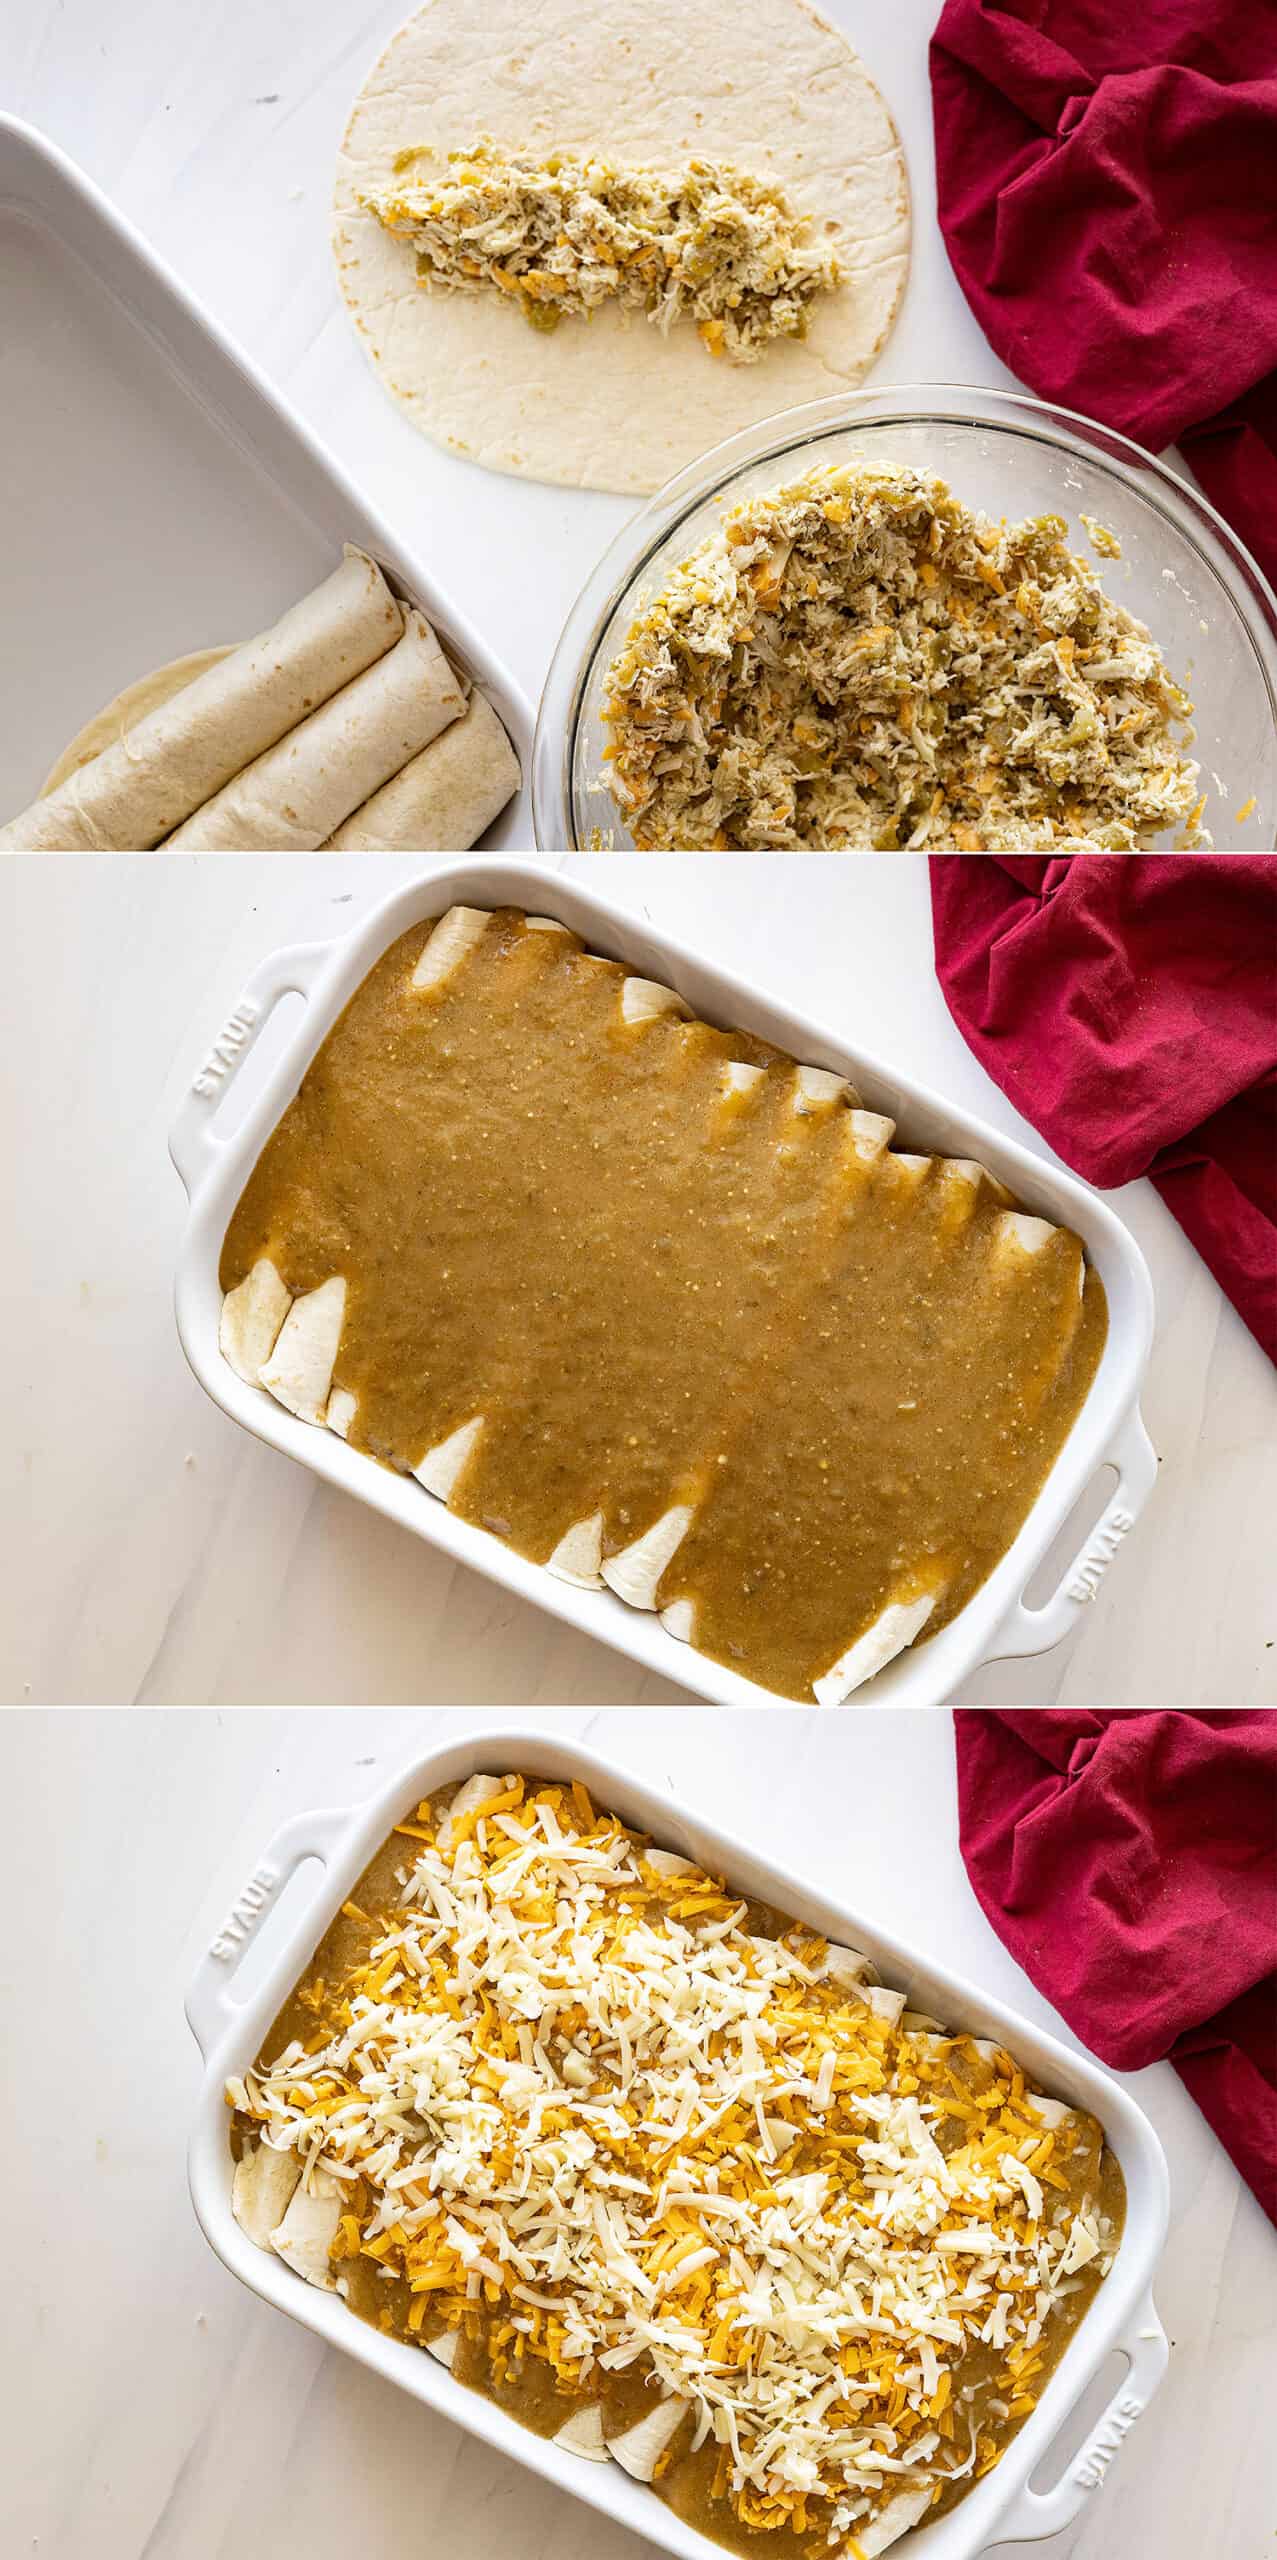 Three pictures showing how to assemble the enchiladas.